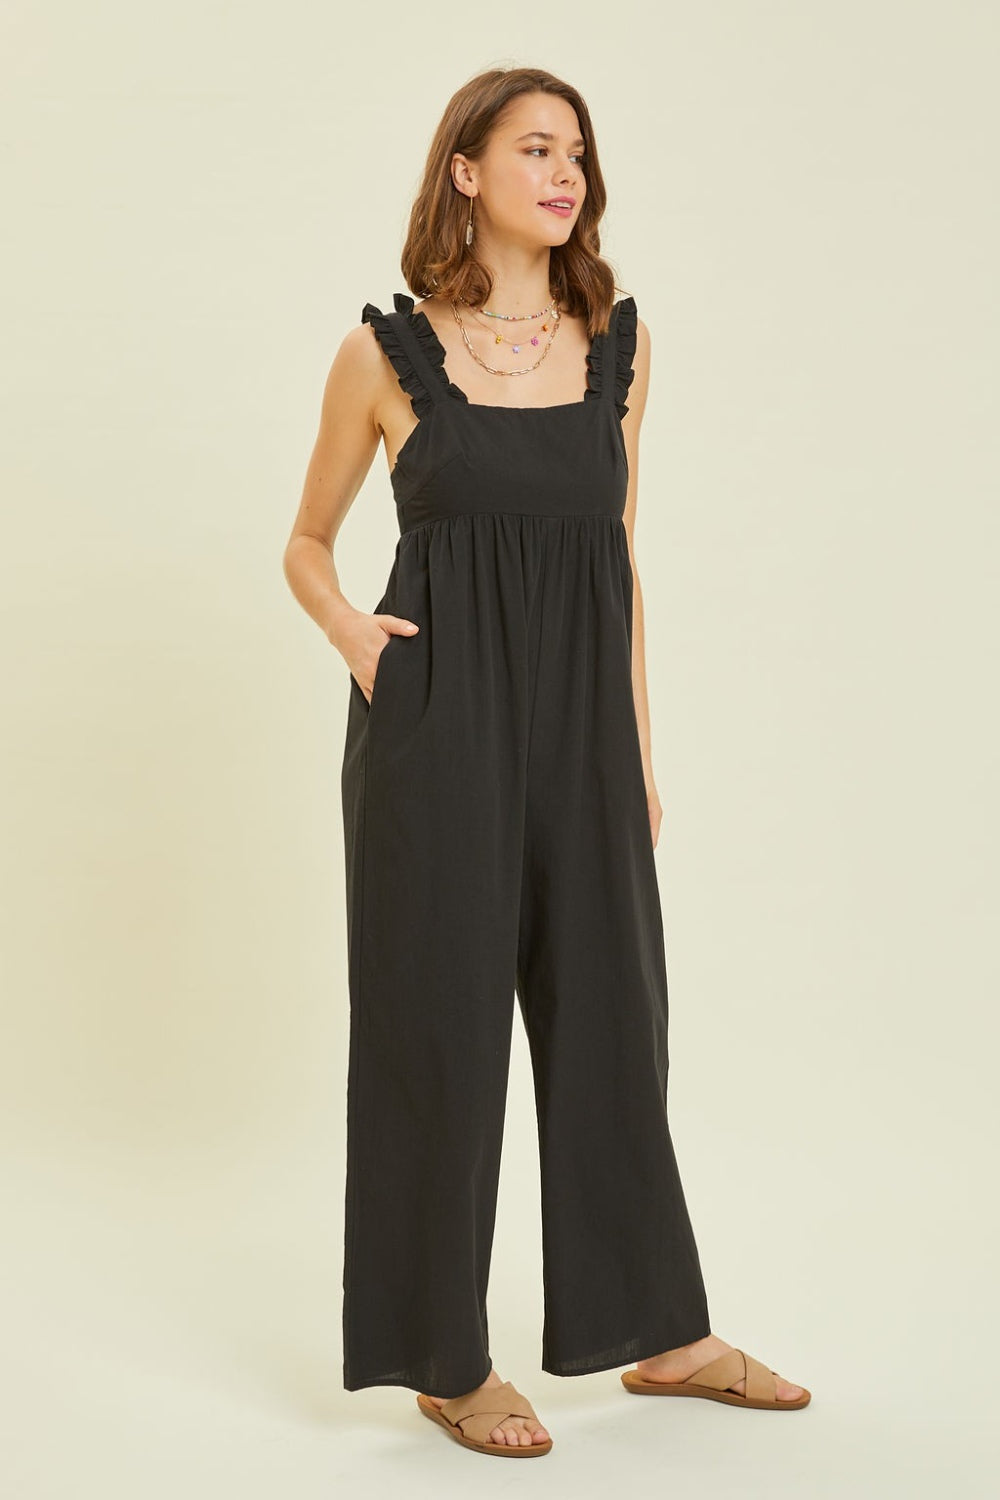 Ruffled Strap Back Tie Wide Leg Jumpsuit in Black Southern Soul Collectives